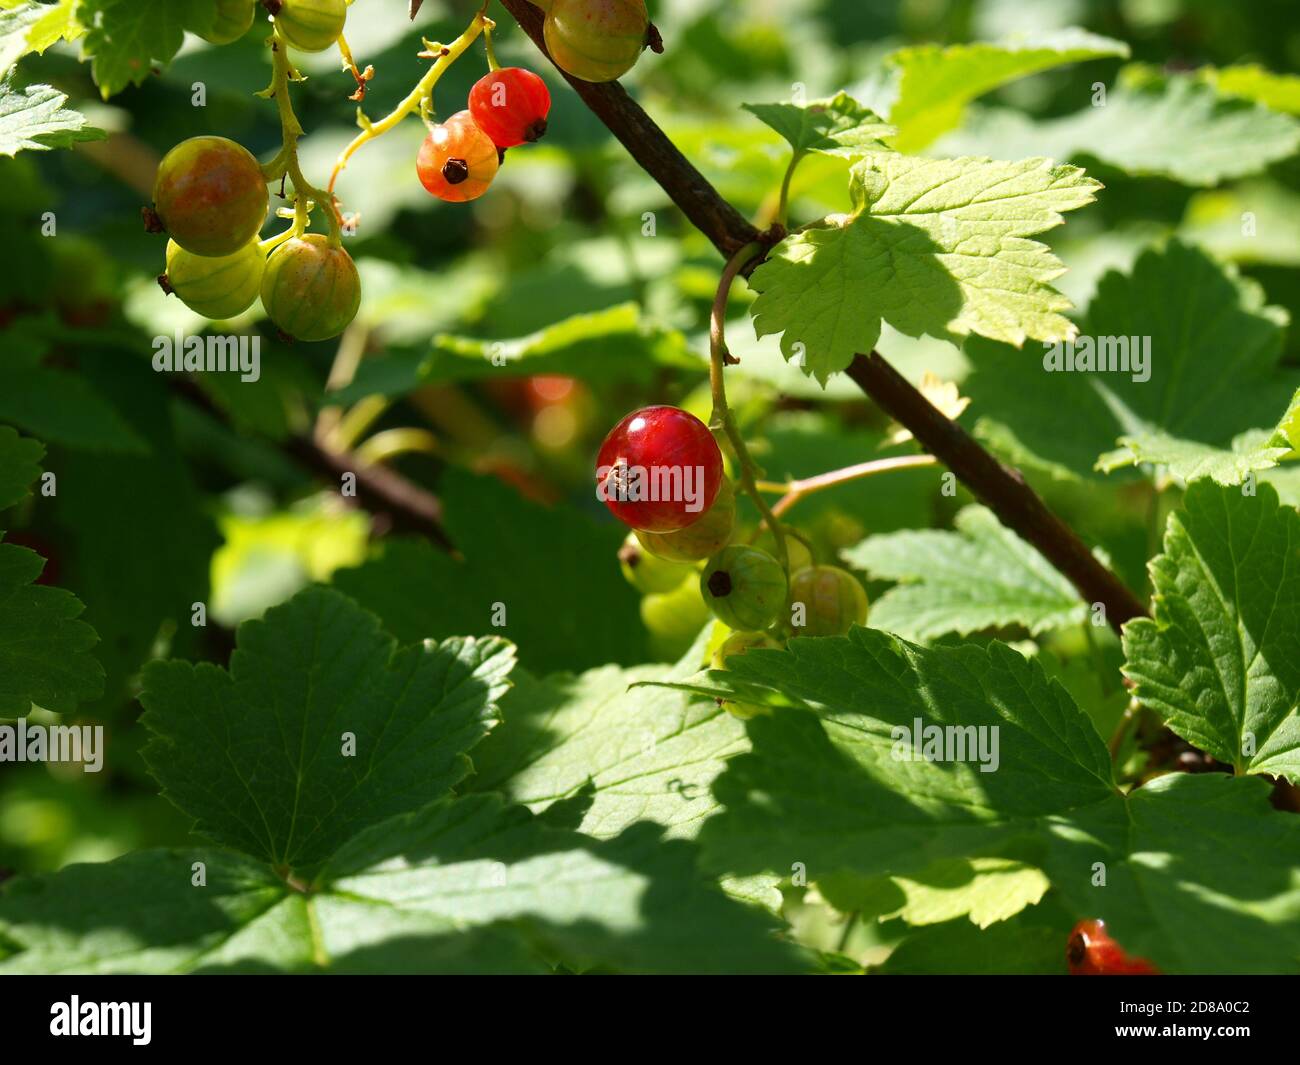 Berry, Red Currant, Eurasian Shrub That Produces Small Edible Red Berries.  Stock Photo, Picture and Royalty Free Image. Image 141771200.